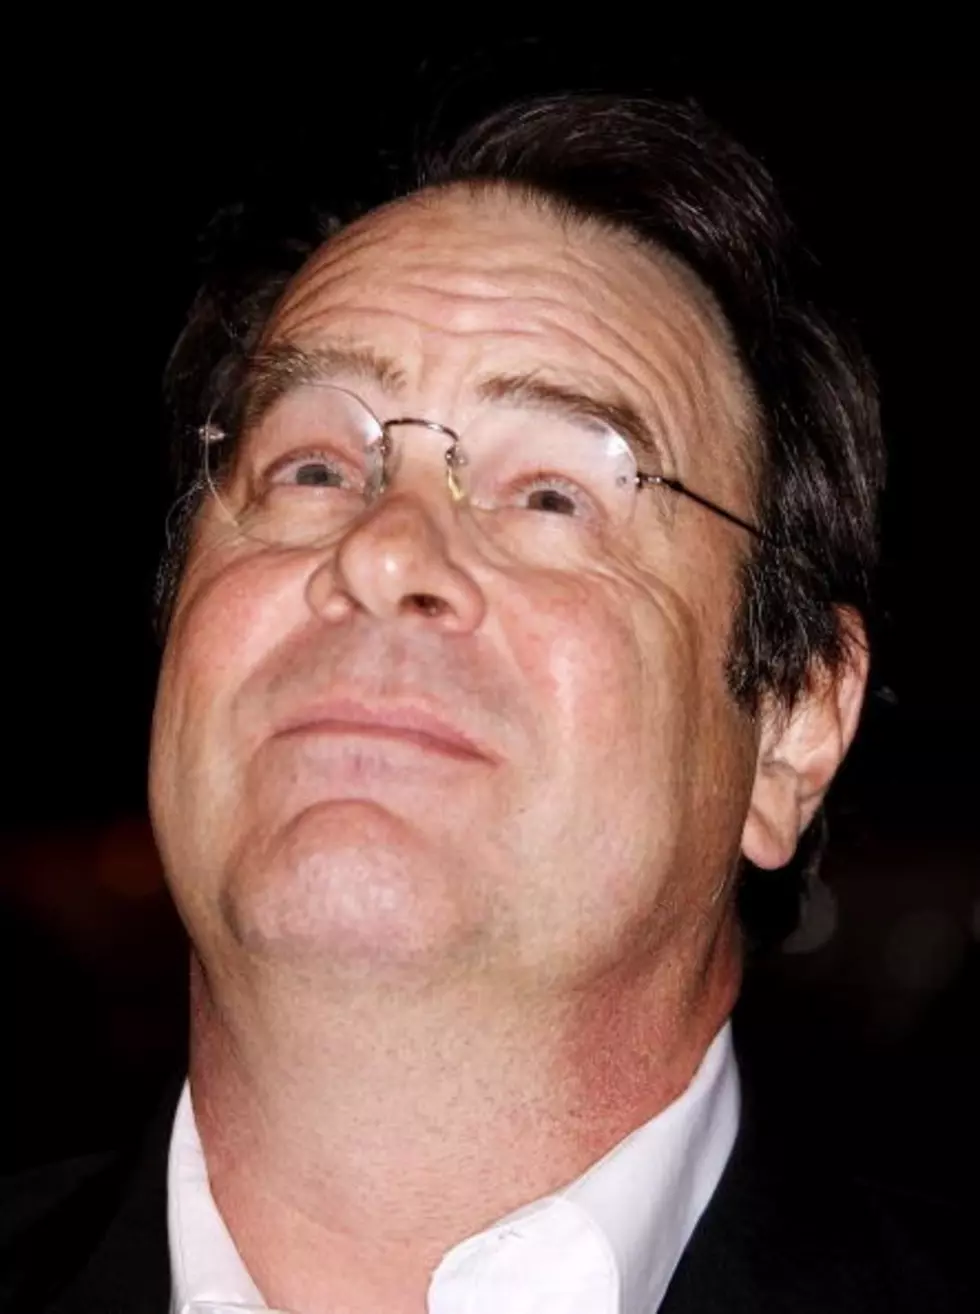 Dan Aykroyd "Aliens Are Among Us and They Want Our Women"